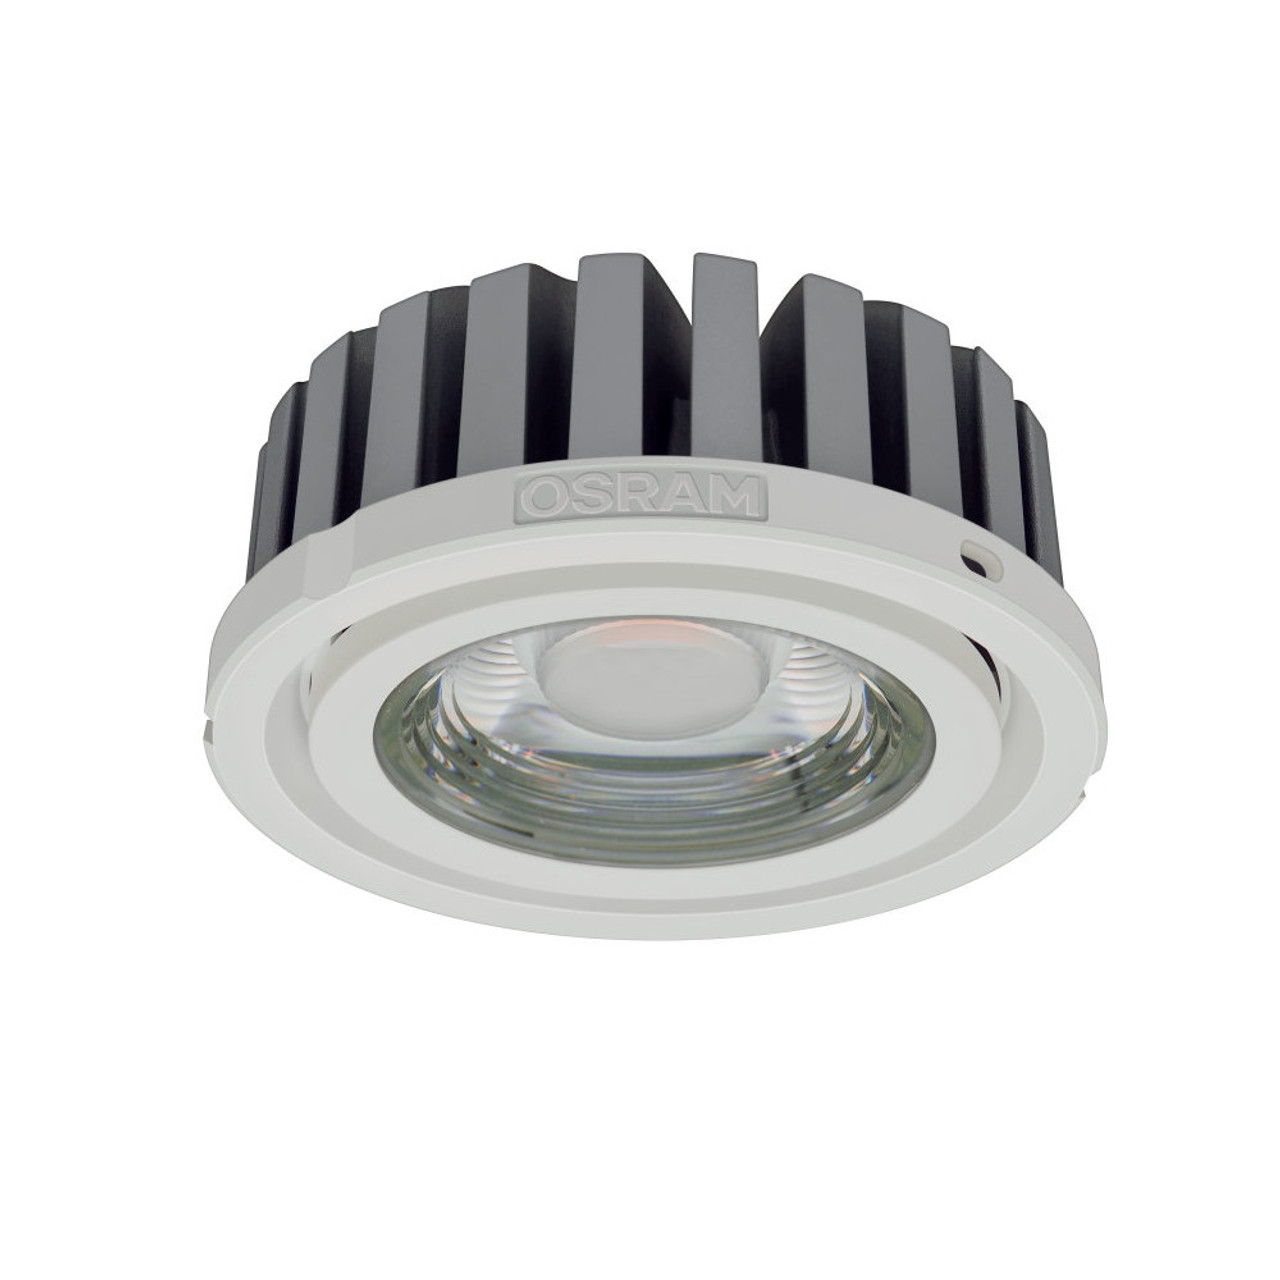 LED 1050mA Constant Current 36.6W Dimmable 935 3500K 3600lm 24 degrees COB